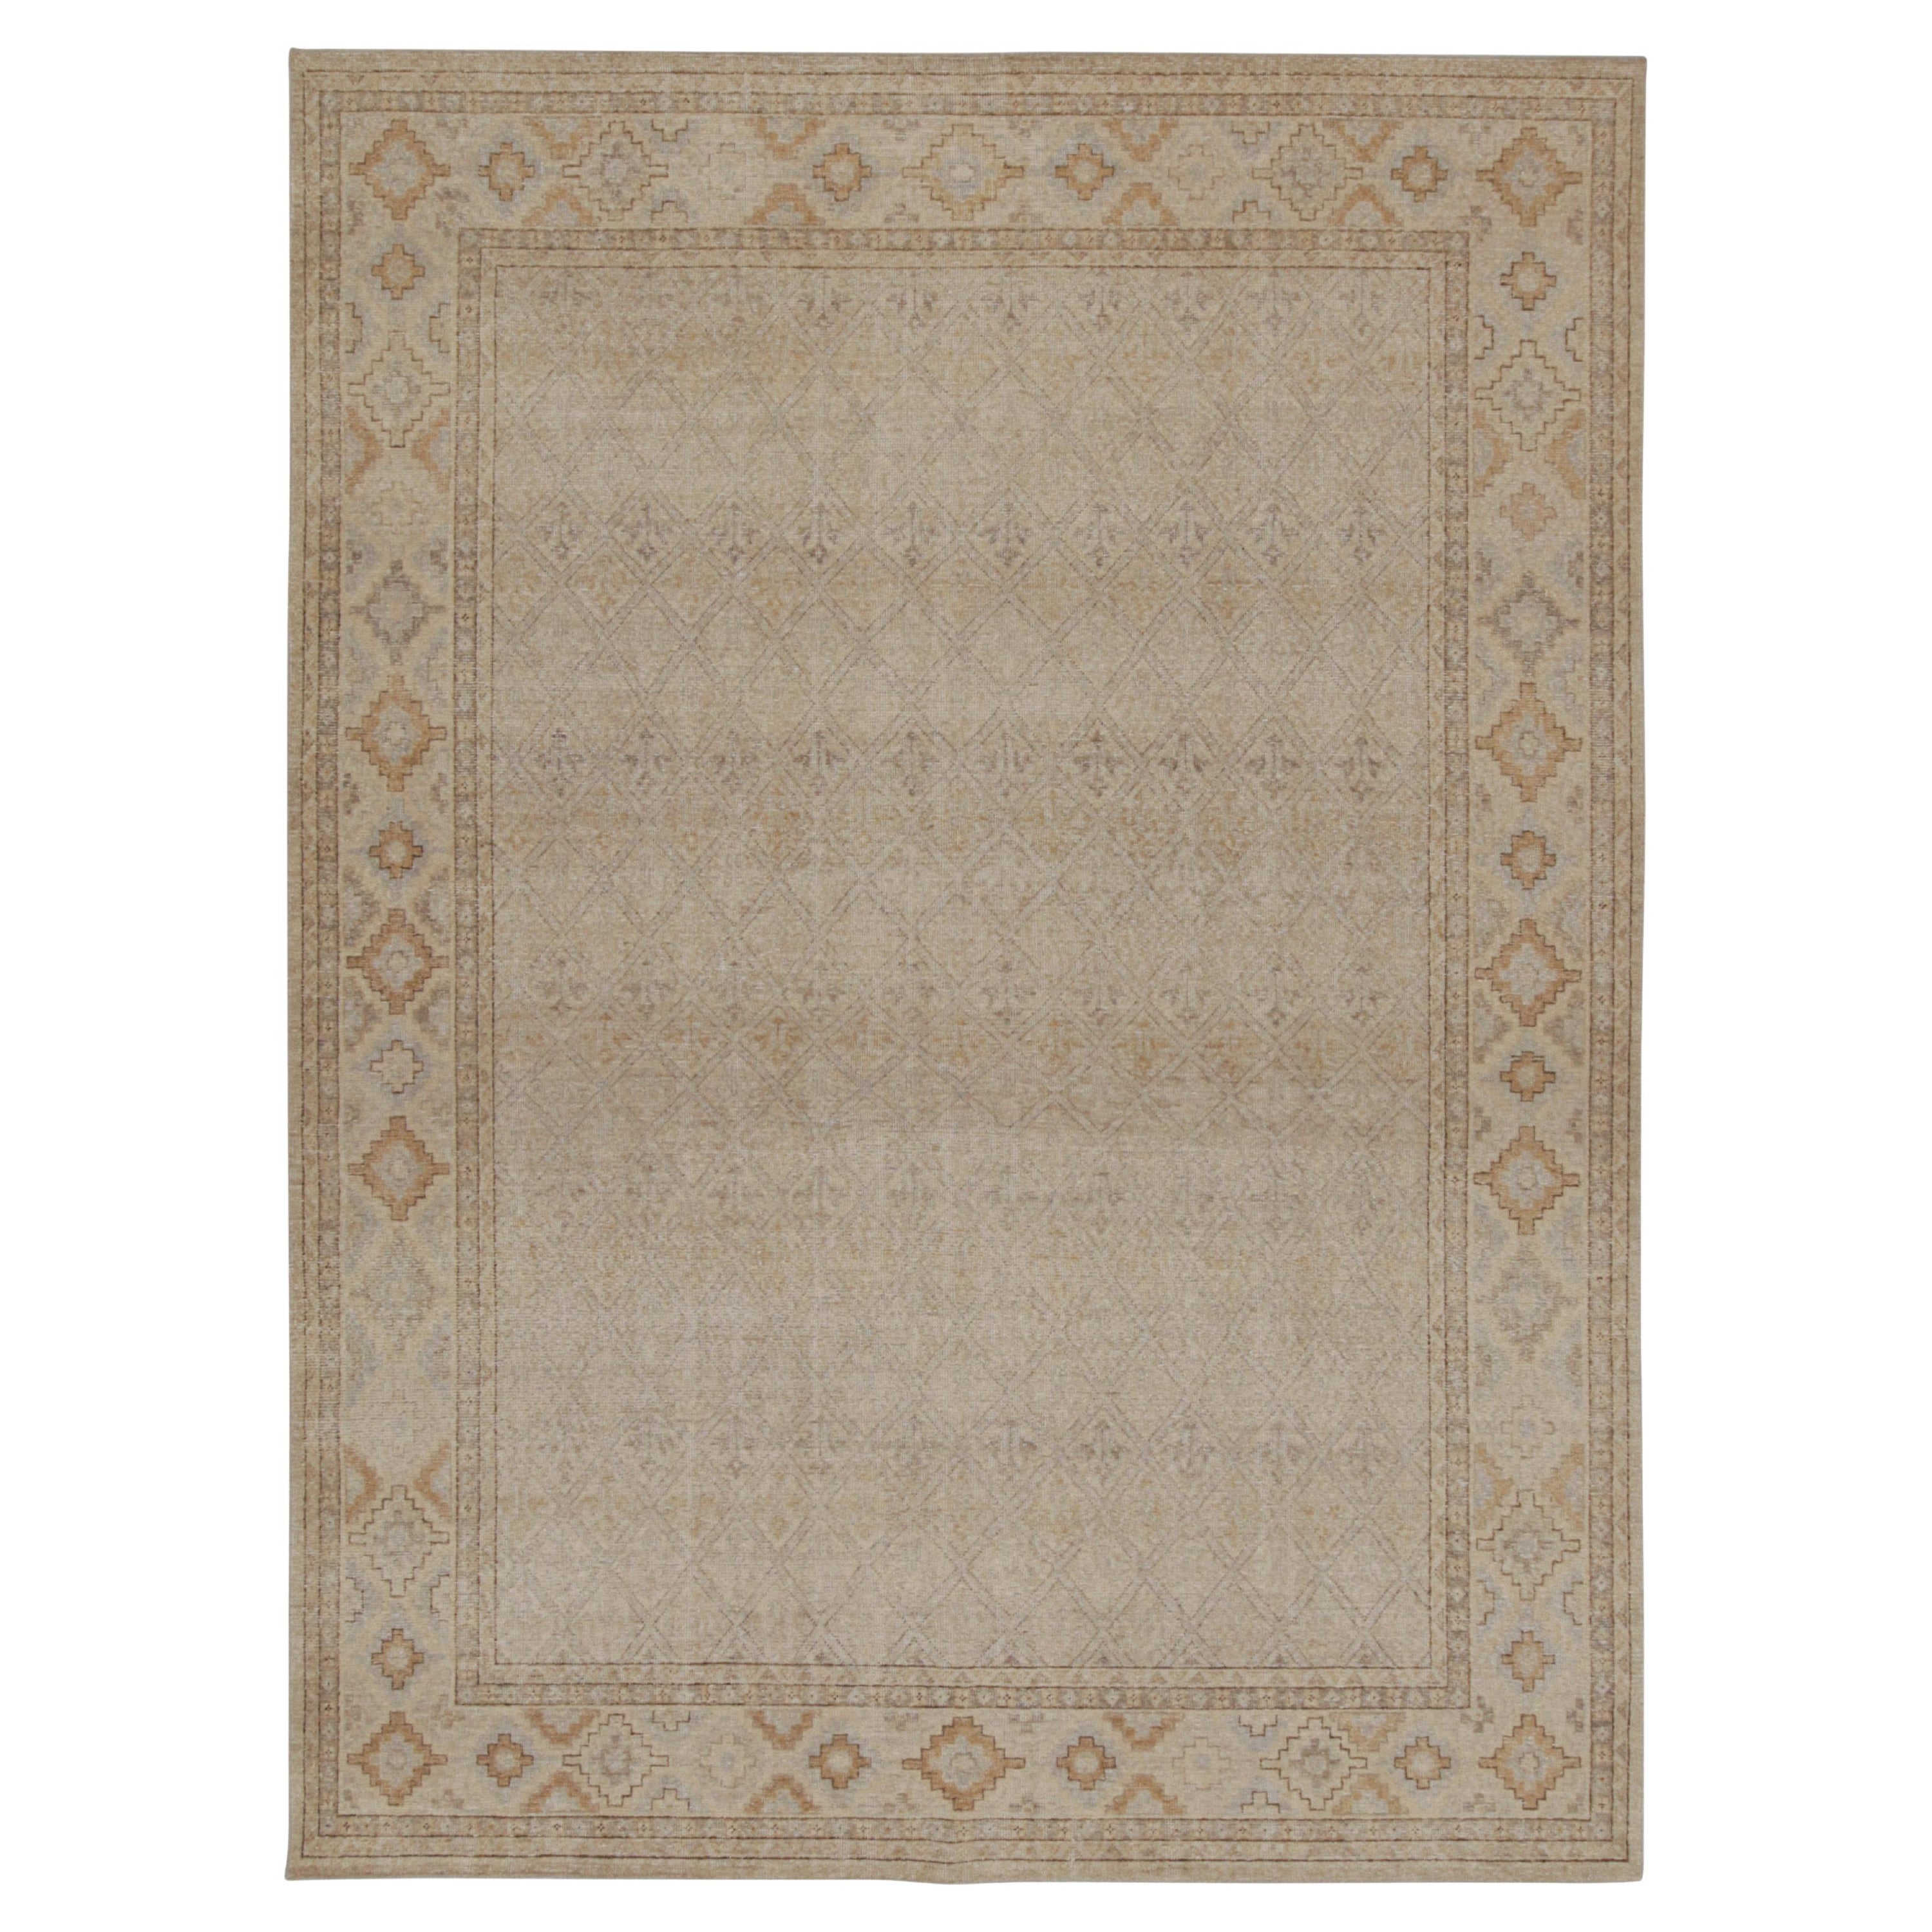 Rug & Kilim’s Distressed Style Rug in Beige, Gray and Blue Geometric Pattern